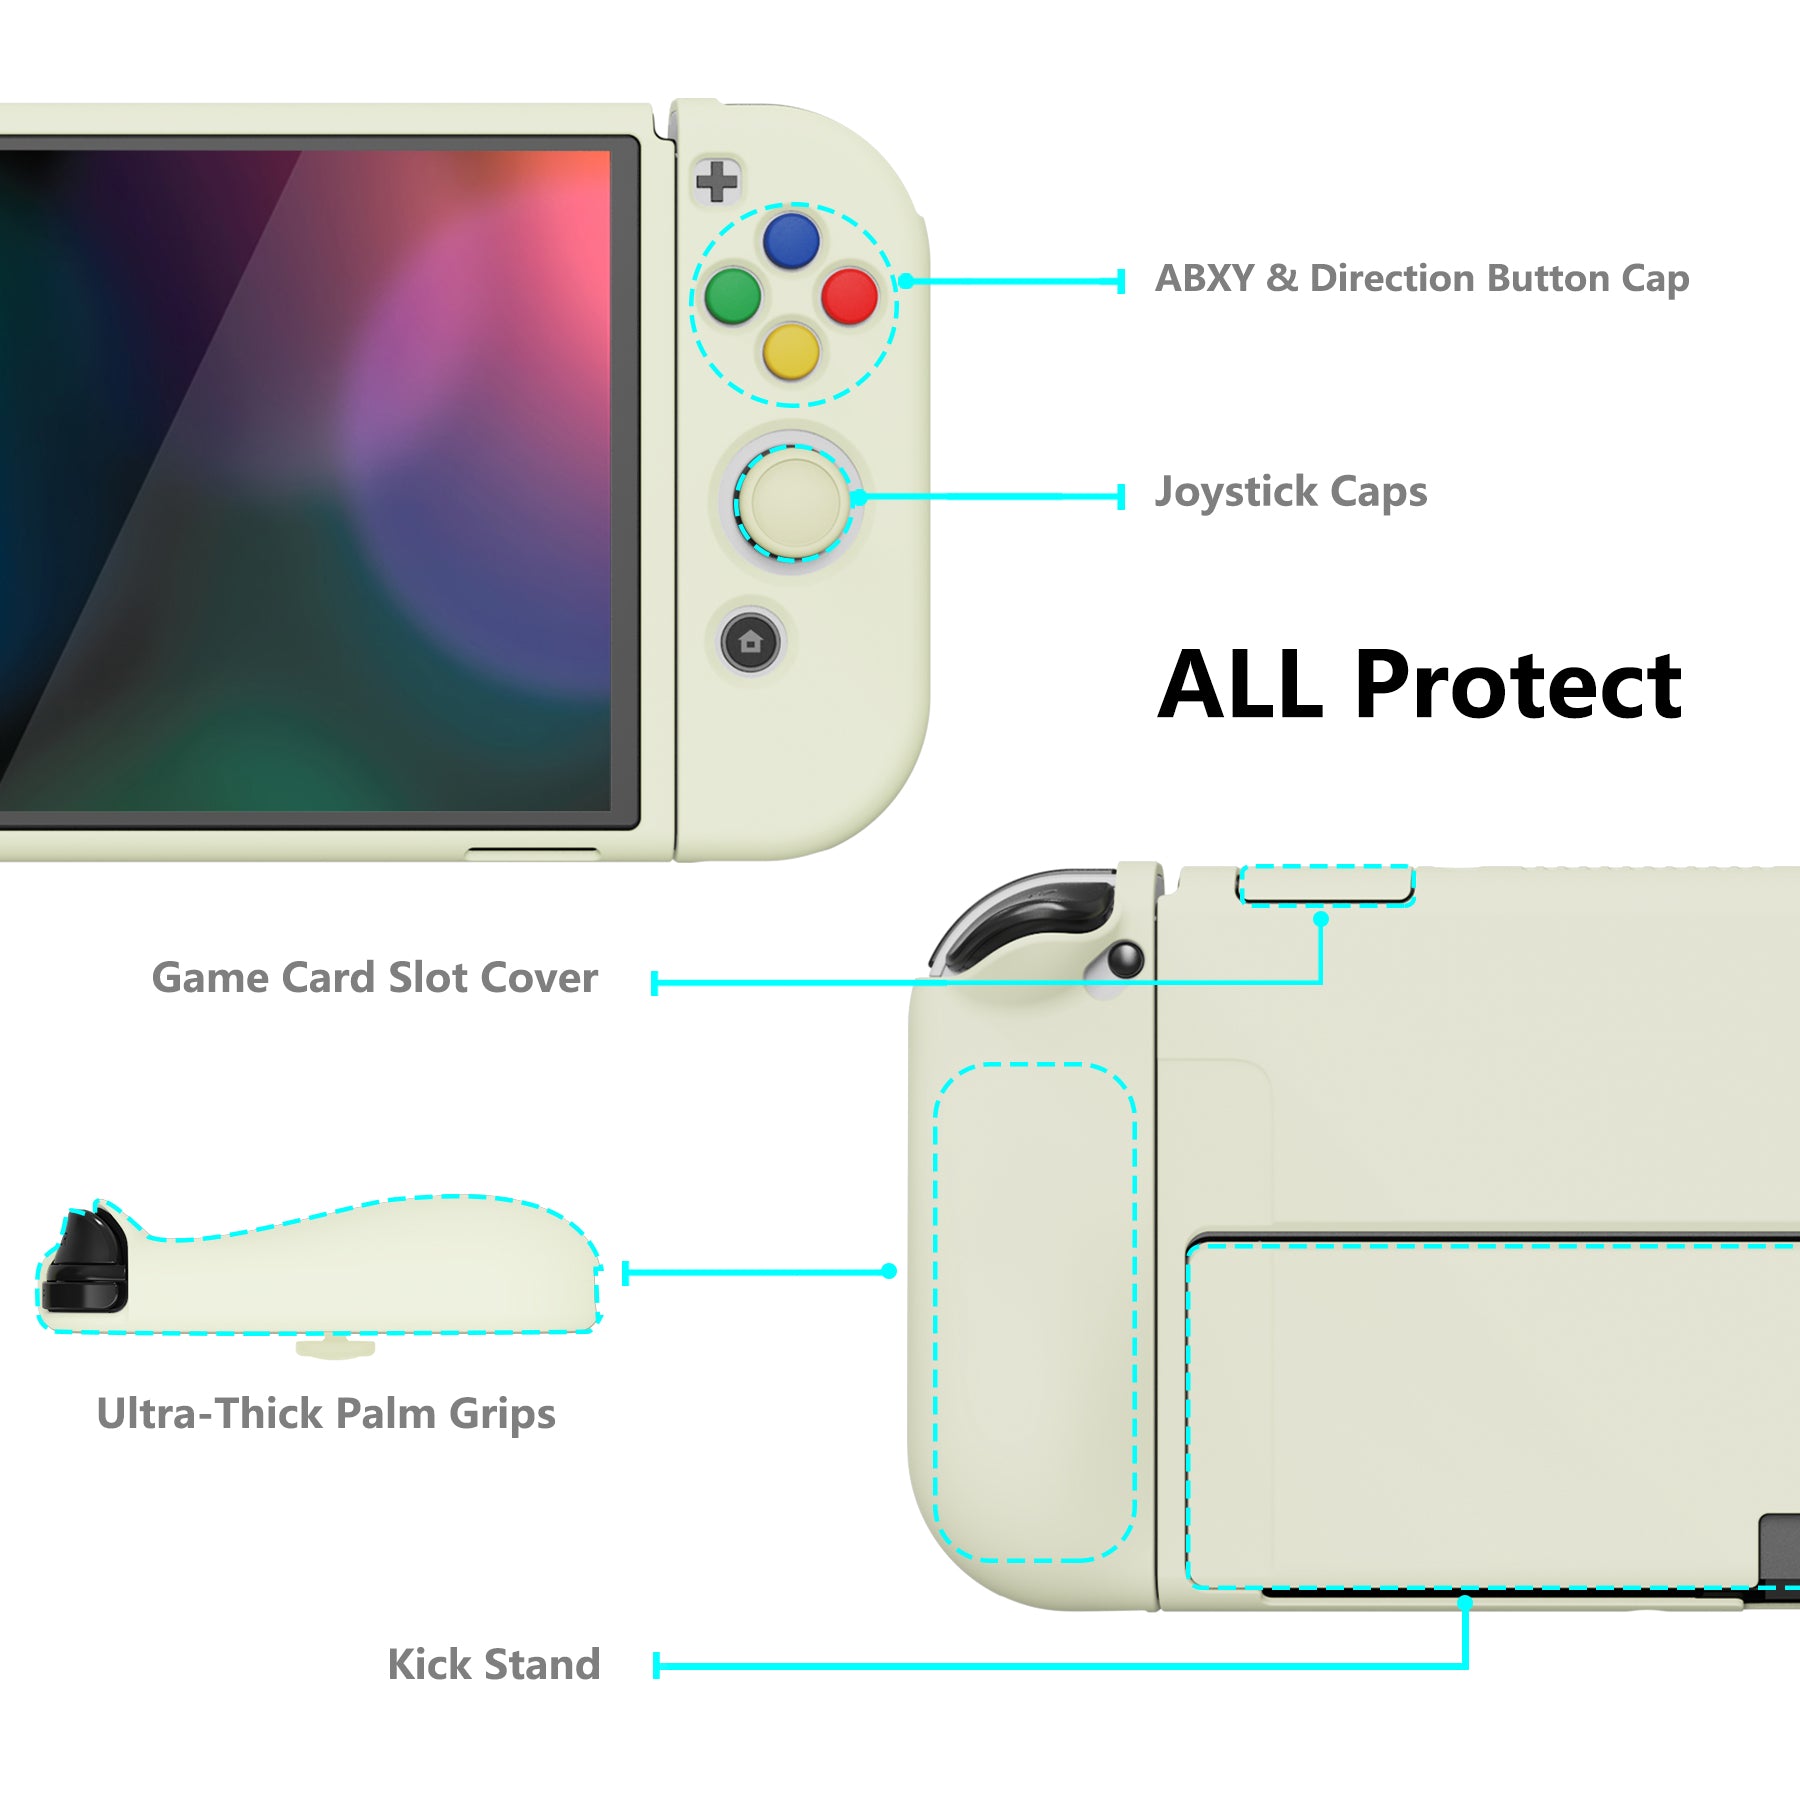 PlayVital ZealProtect Soft Protective Case for Switch OLED, Flexible Protector Joycon Grip Cover for Switch OLED with Thumb Grip Caps & ABXY Direction Button Caps - Antique Yellow - XSOYM5005 playvital